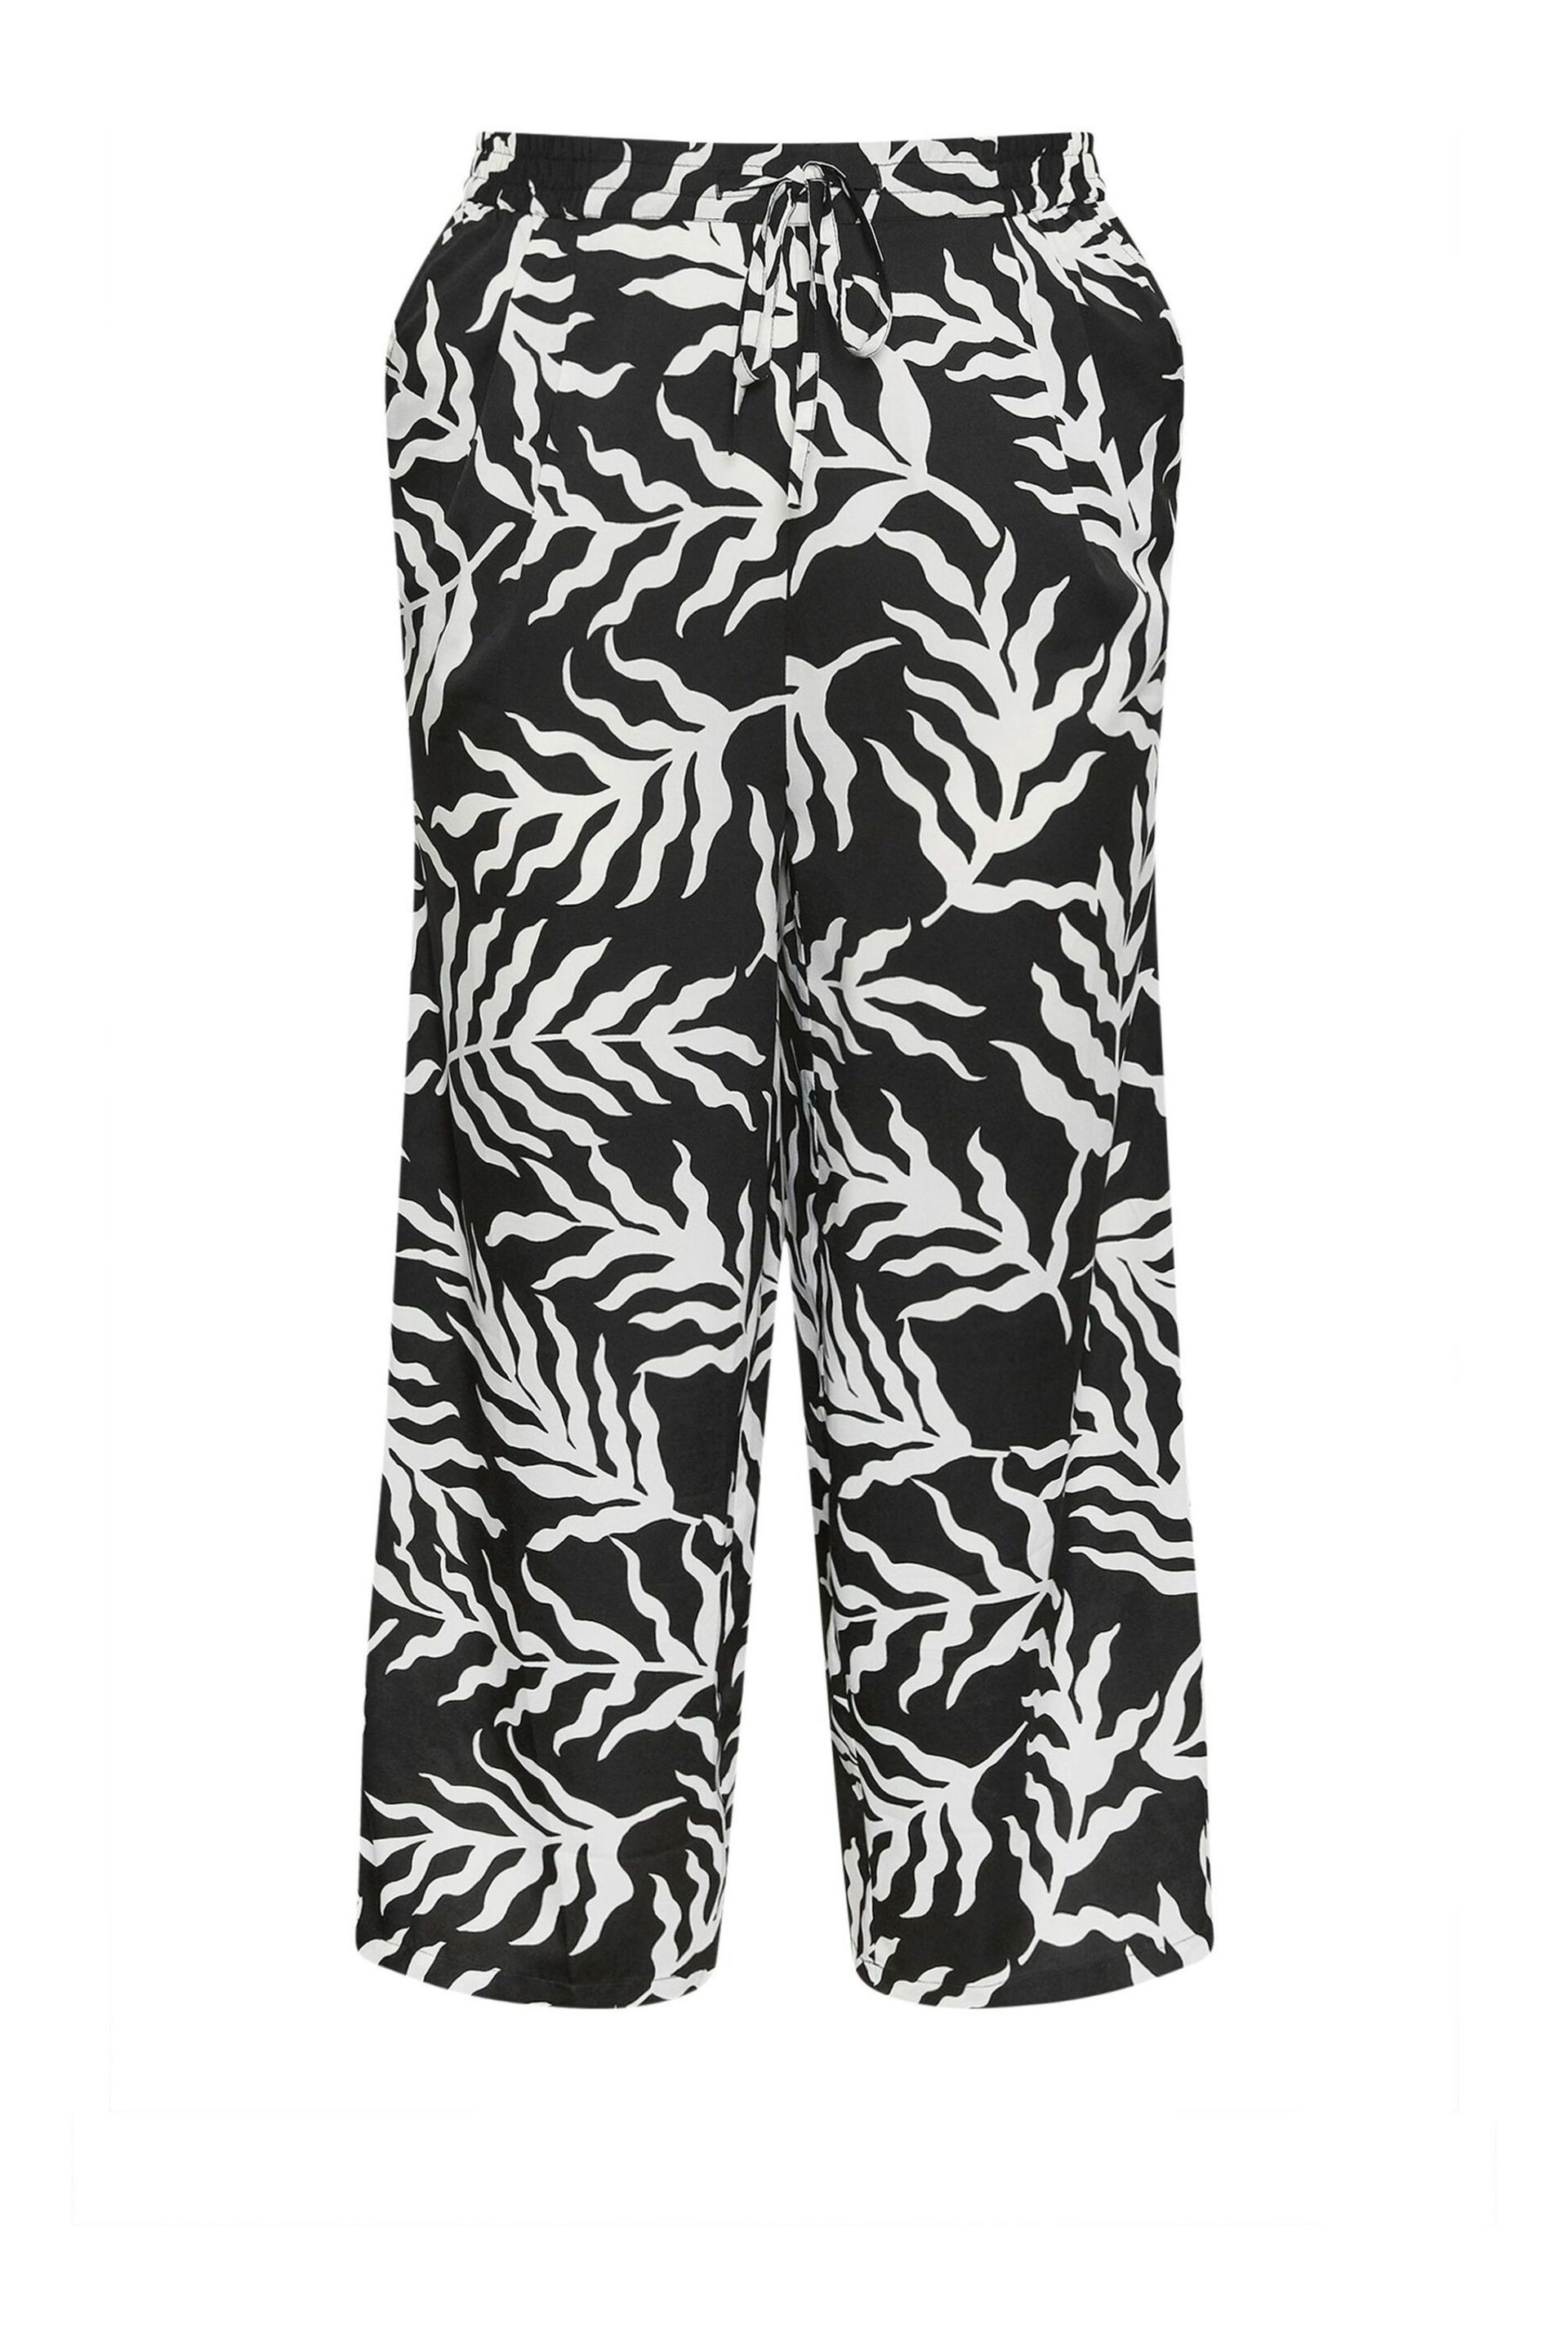 Yours Curve Black Leaf Print Drawstring Wide Leg Trousers - Image 6 of 6